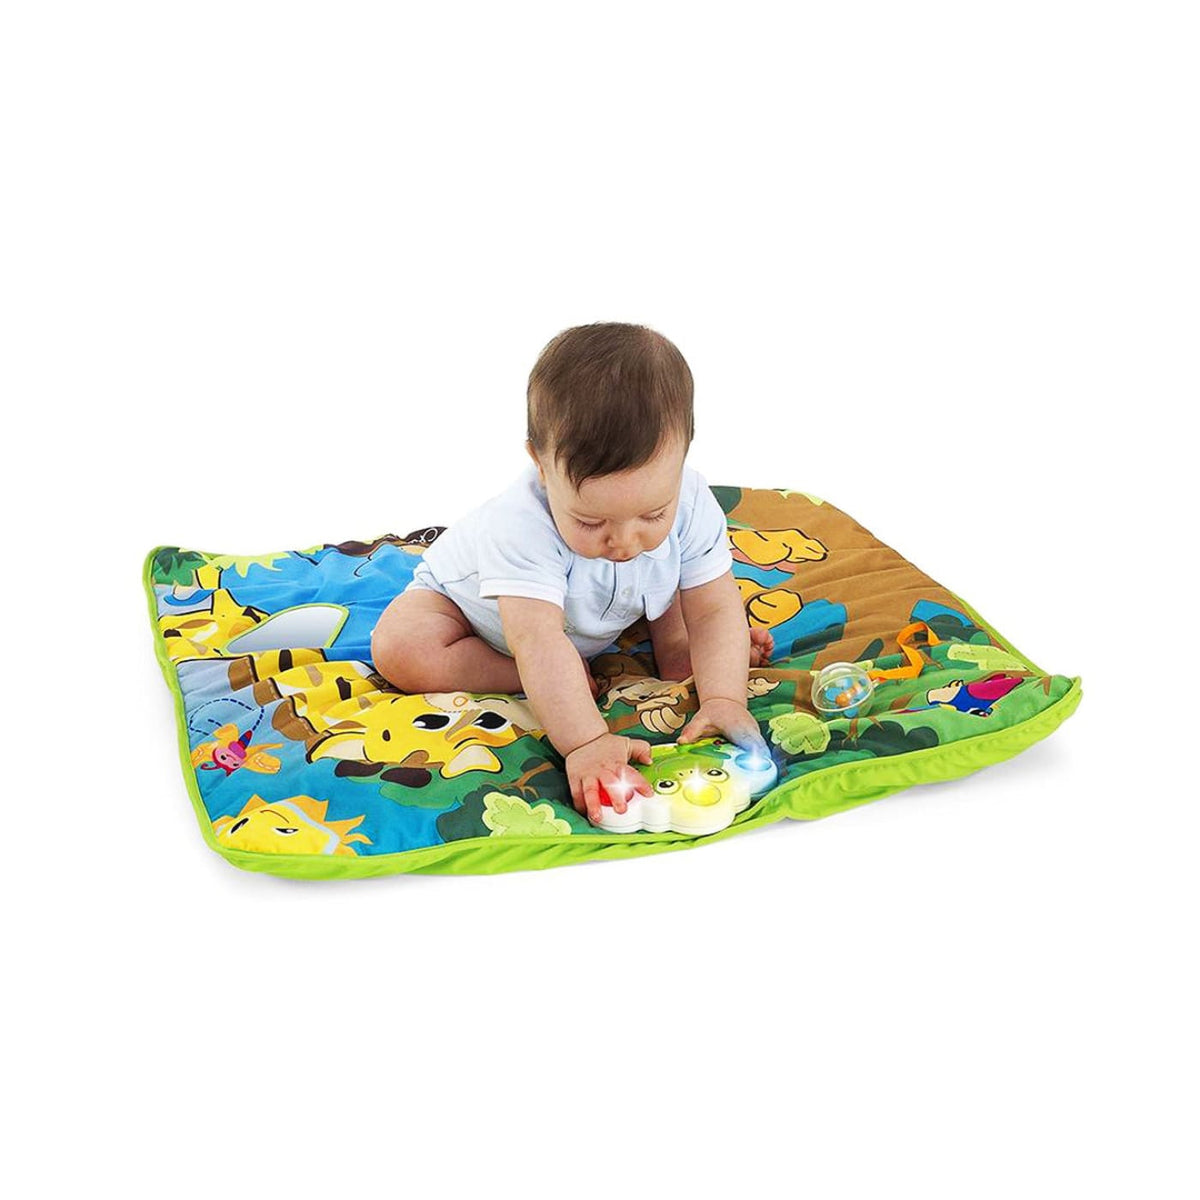 Chicco Musical Jungle Playmat - TOYS &amp; PLAY - PLAY MATS/GYMS